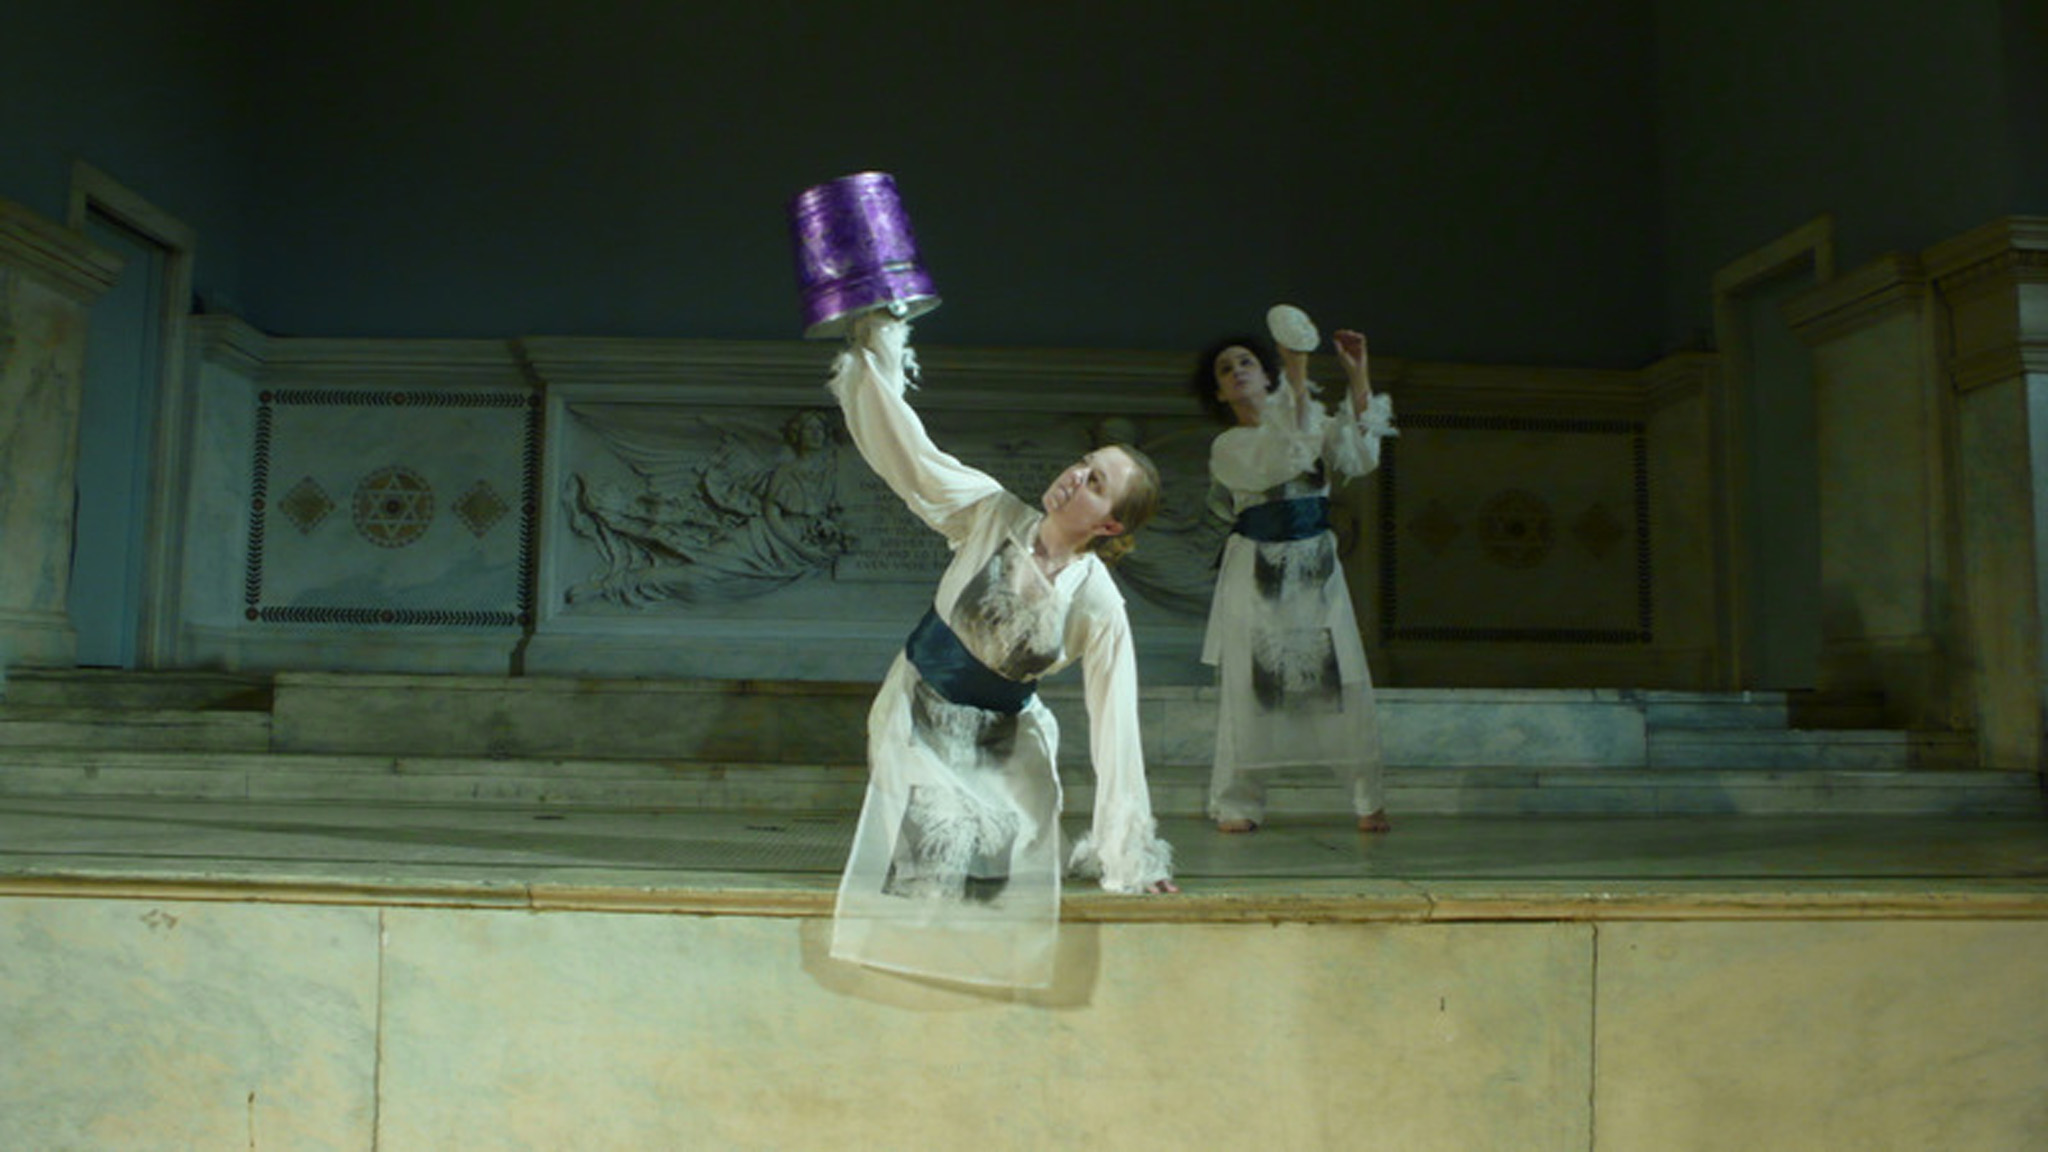   Moon in the Bucket , backdrop, costumes, set, Fisher Ensemble opera performed Judson Memorial Church, NYC, 2008. 